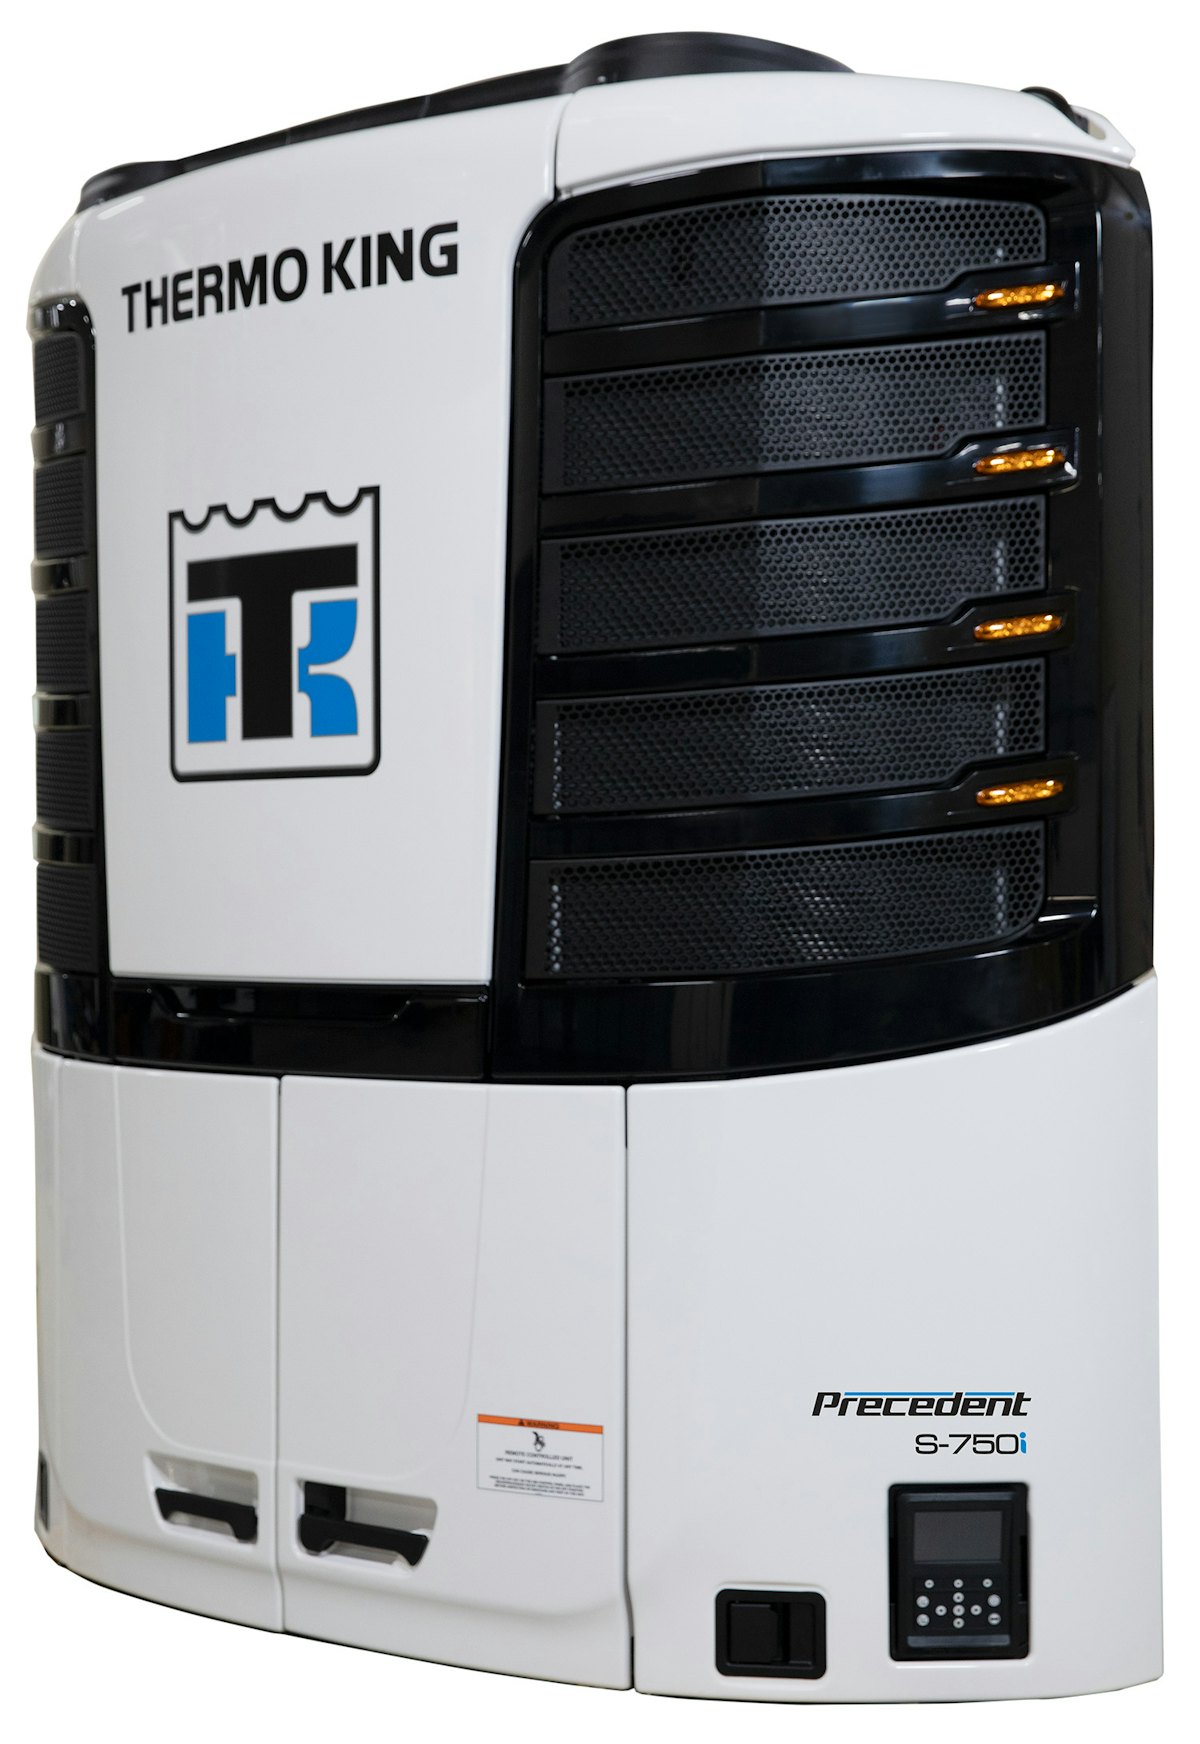 Thermo King debuts new trailer reefer platform